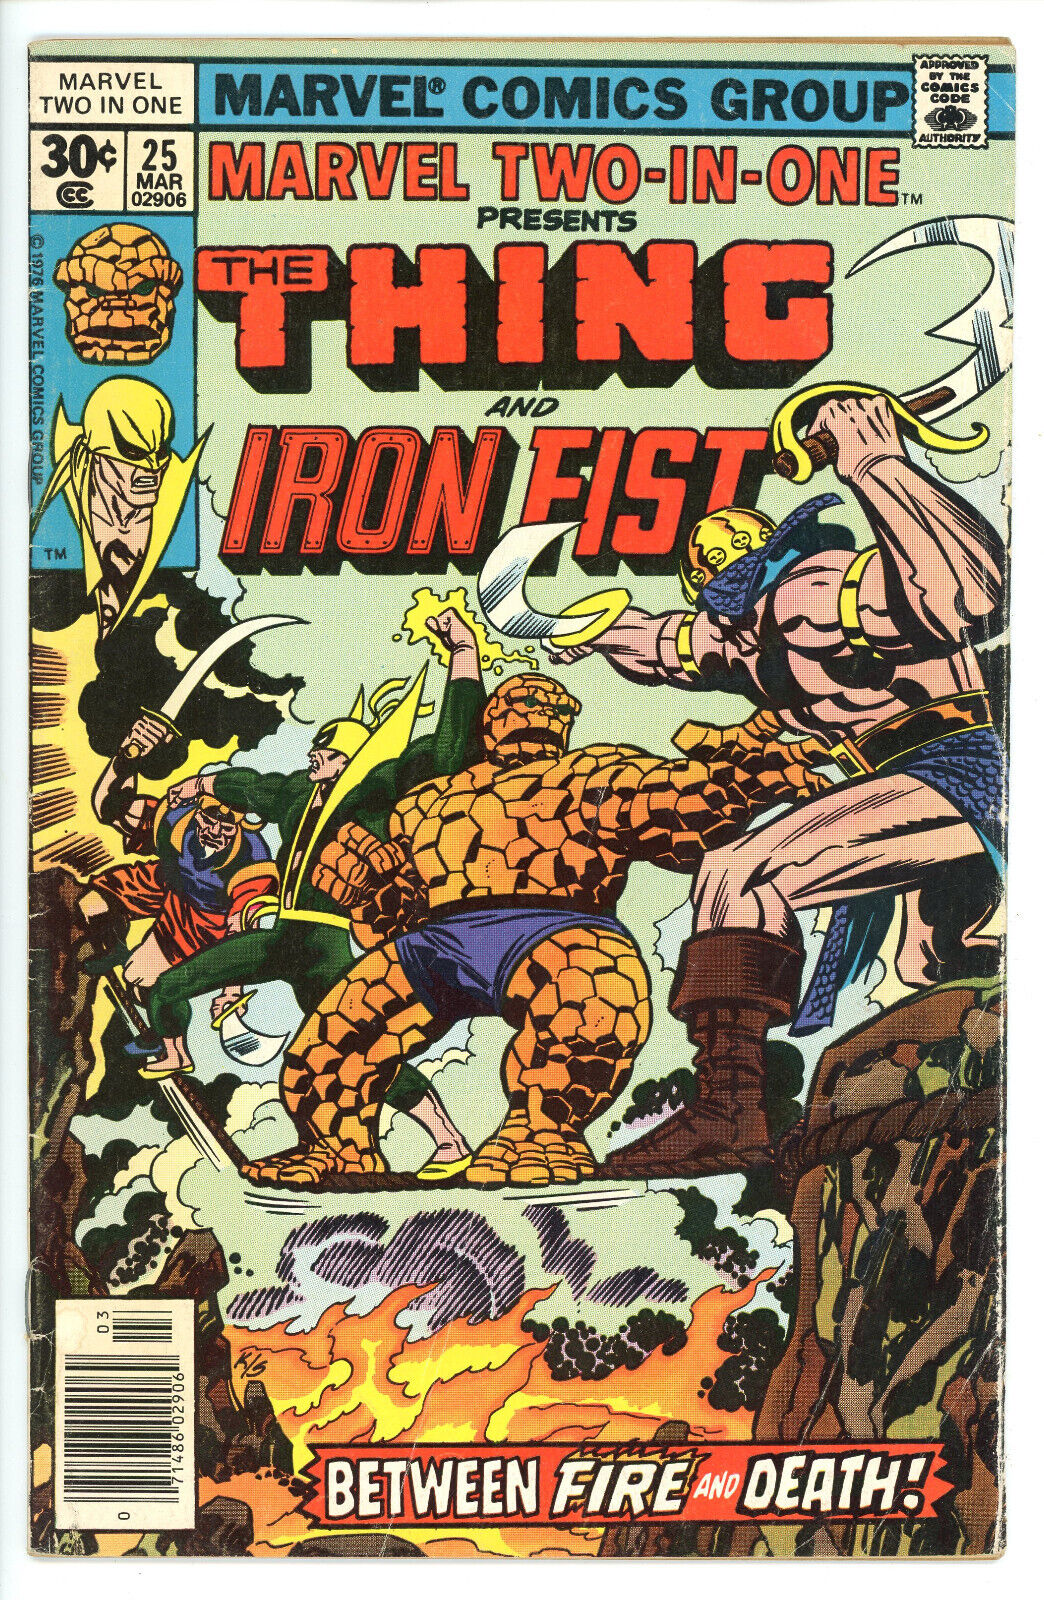 MARVEL TWO IN ONE #25 LOWER GRADE IRON FIST 2 IN 1 1976 25 CENT COMBINE SHIP